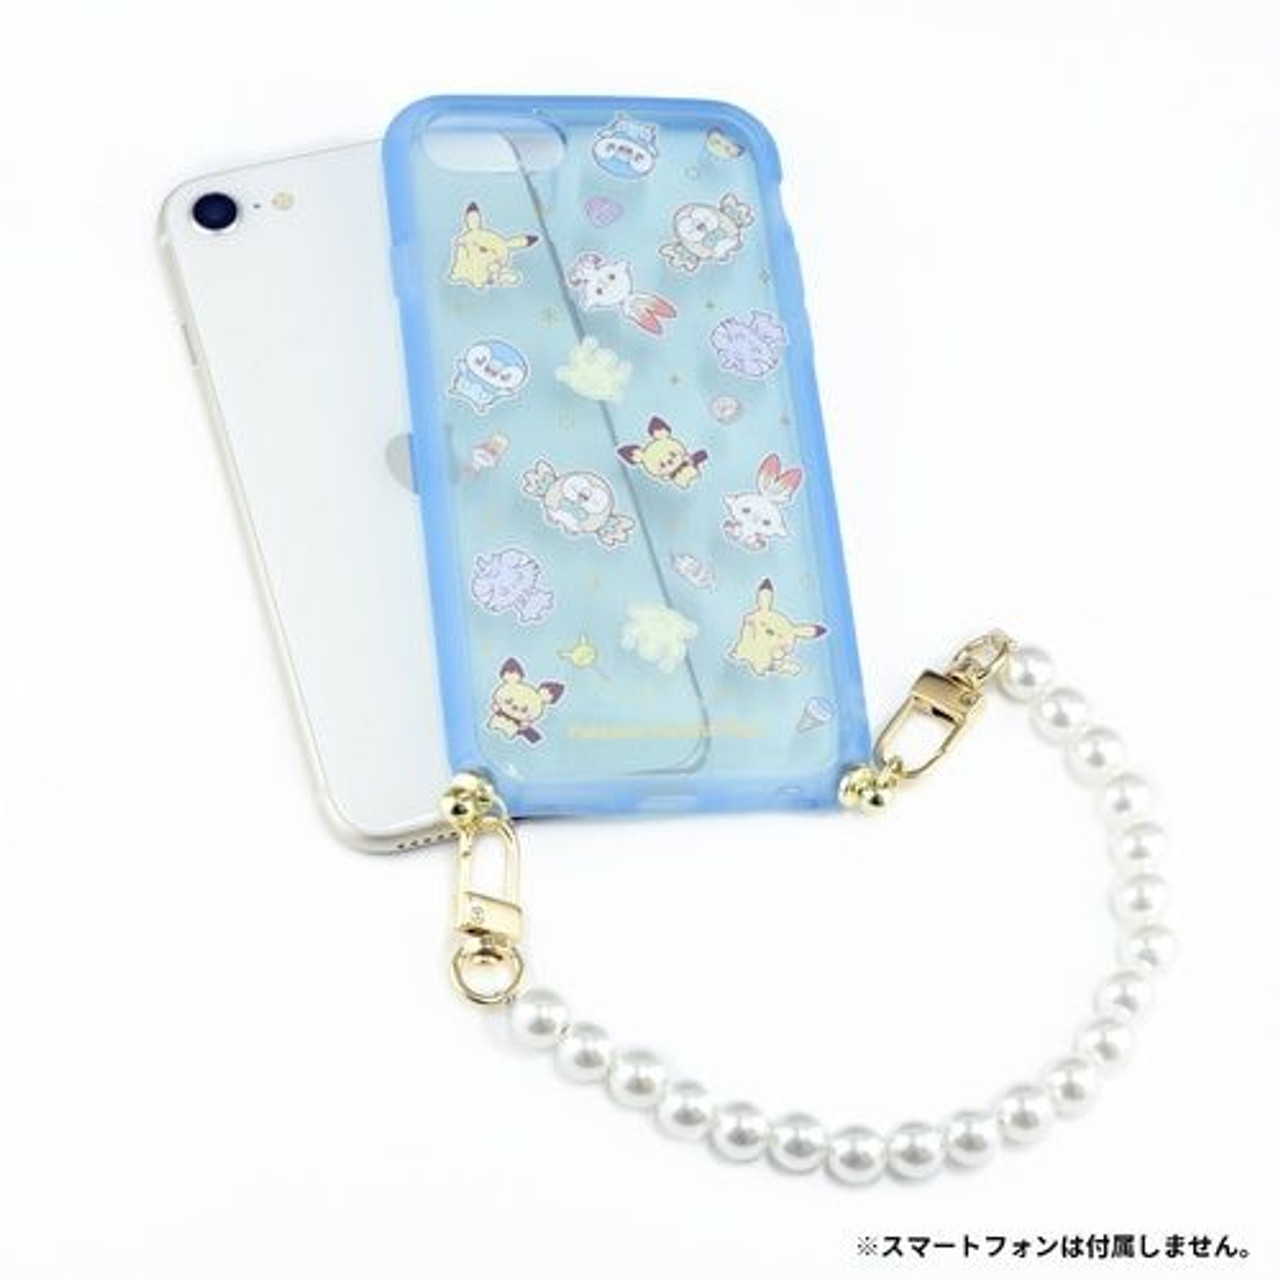 PokePeace IIIIfit Case for iPhone SE (3rd/2nd gen.)/8/7/6s/6 with Pearl  Strap - Everybody